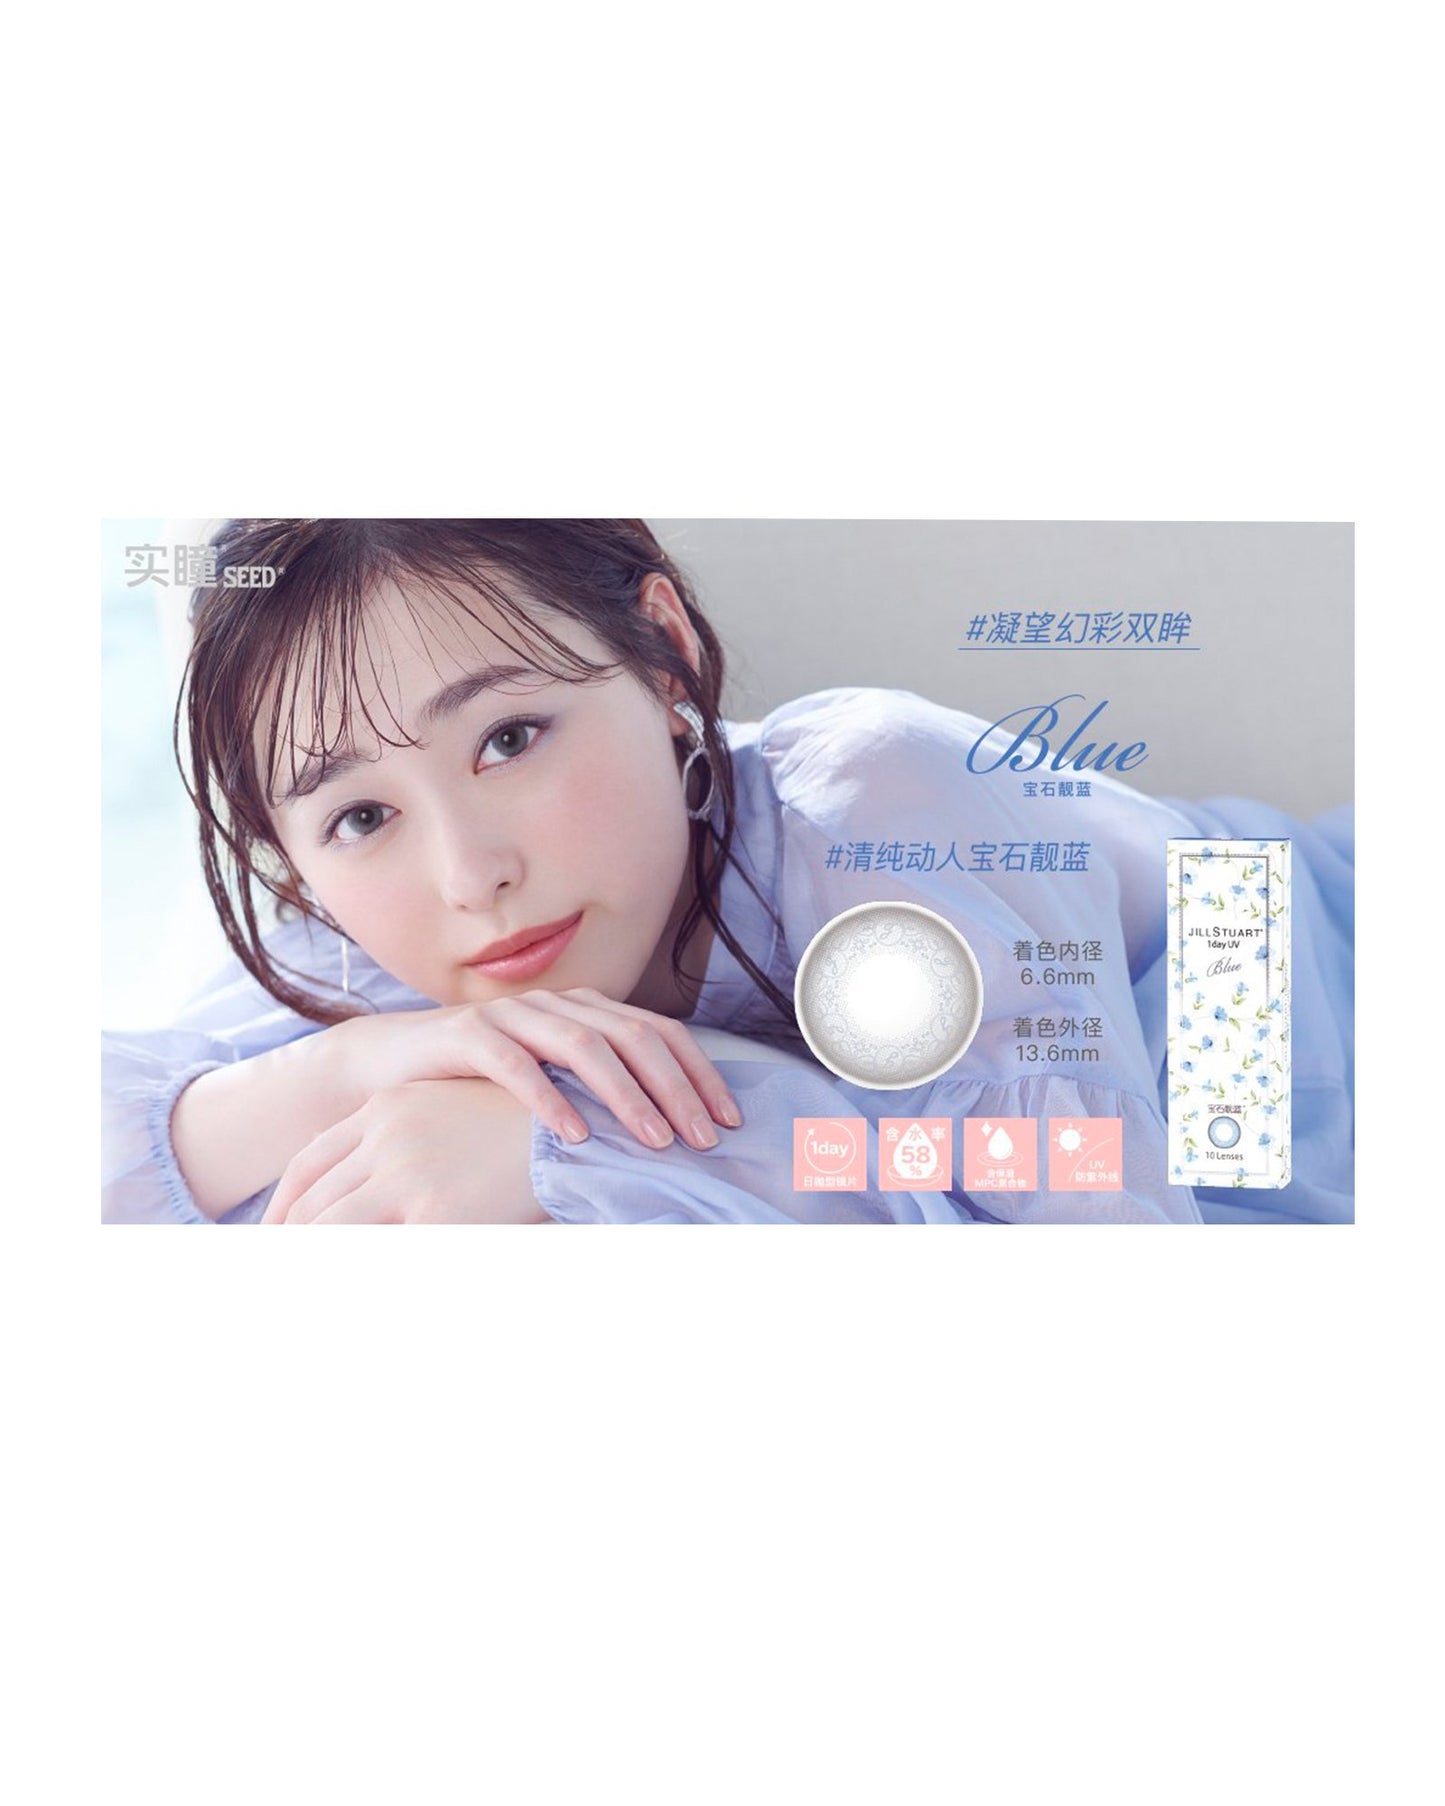 Jill 1 Day UV - Eleven Eleven Contact Lens and Vision Care Experts